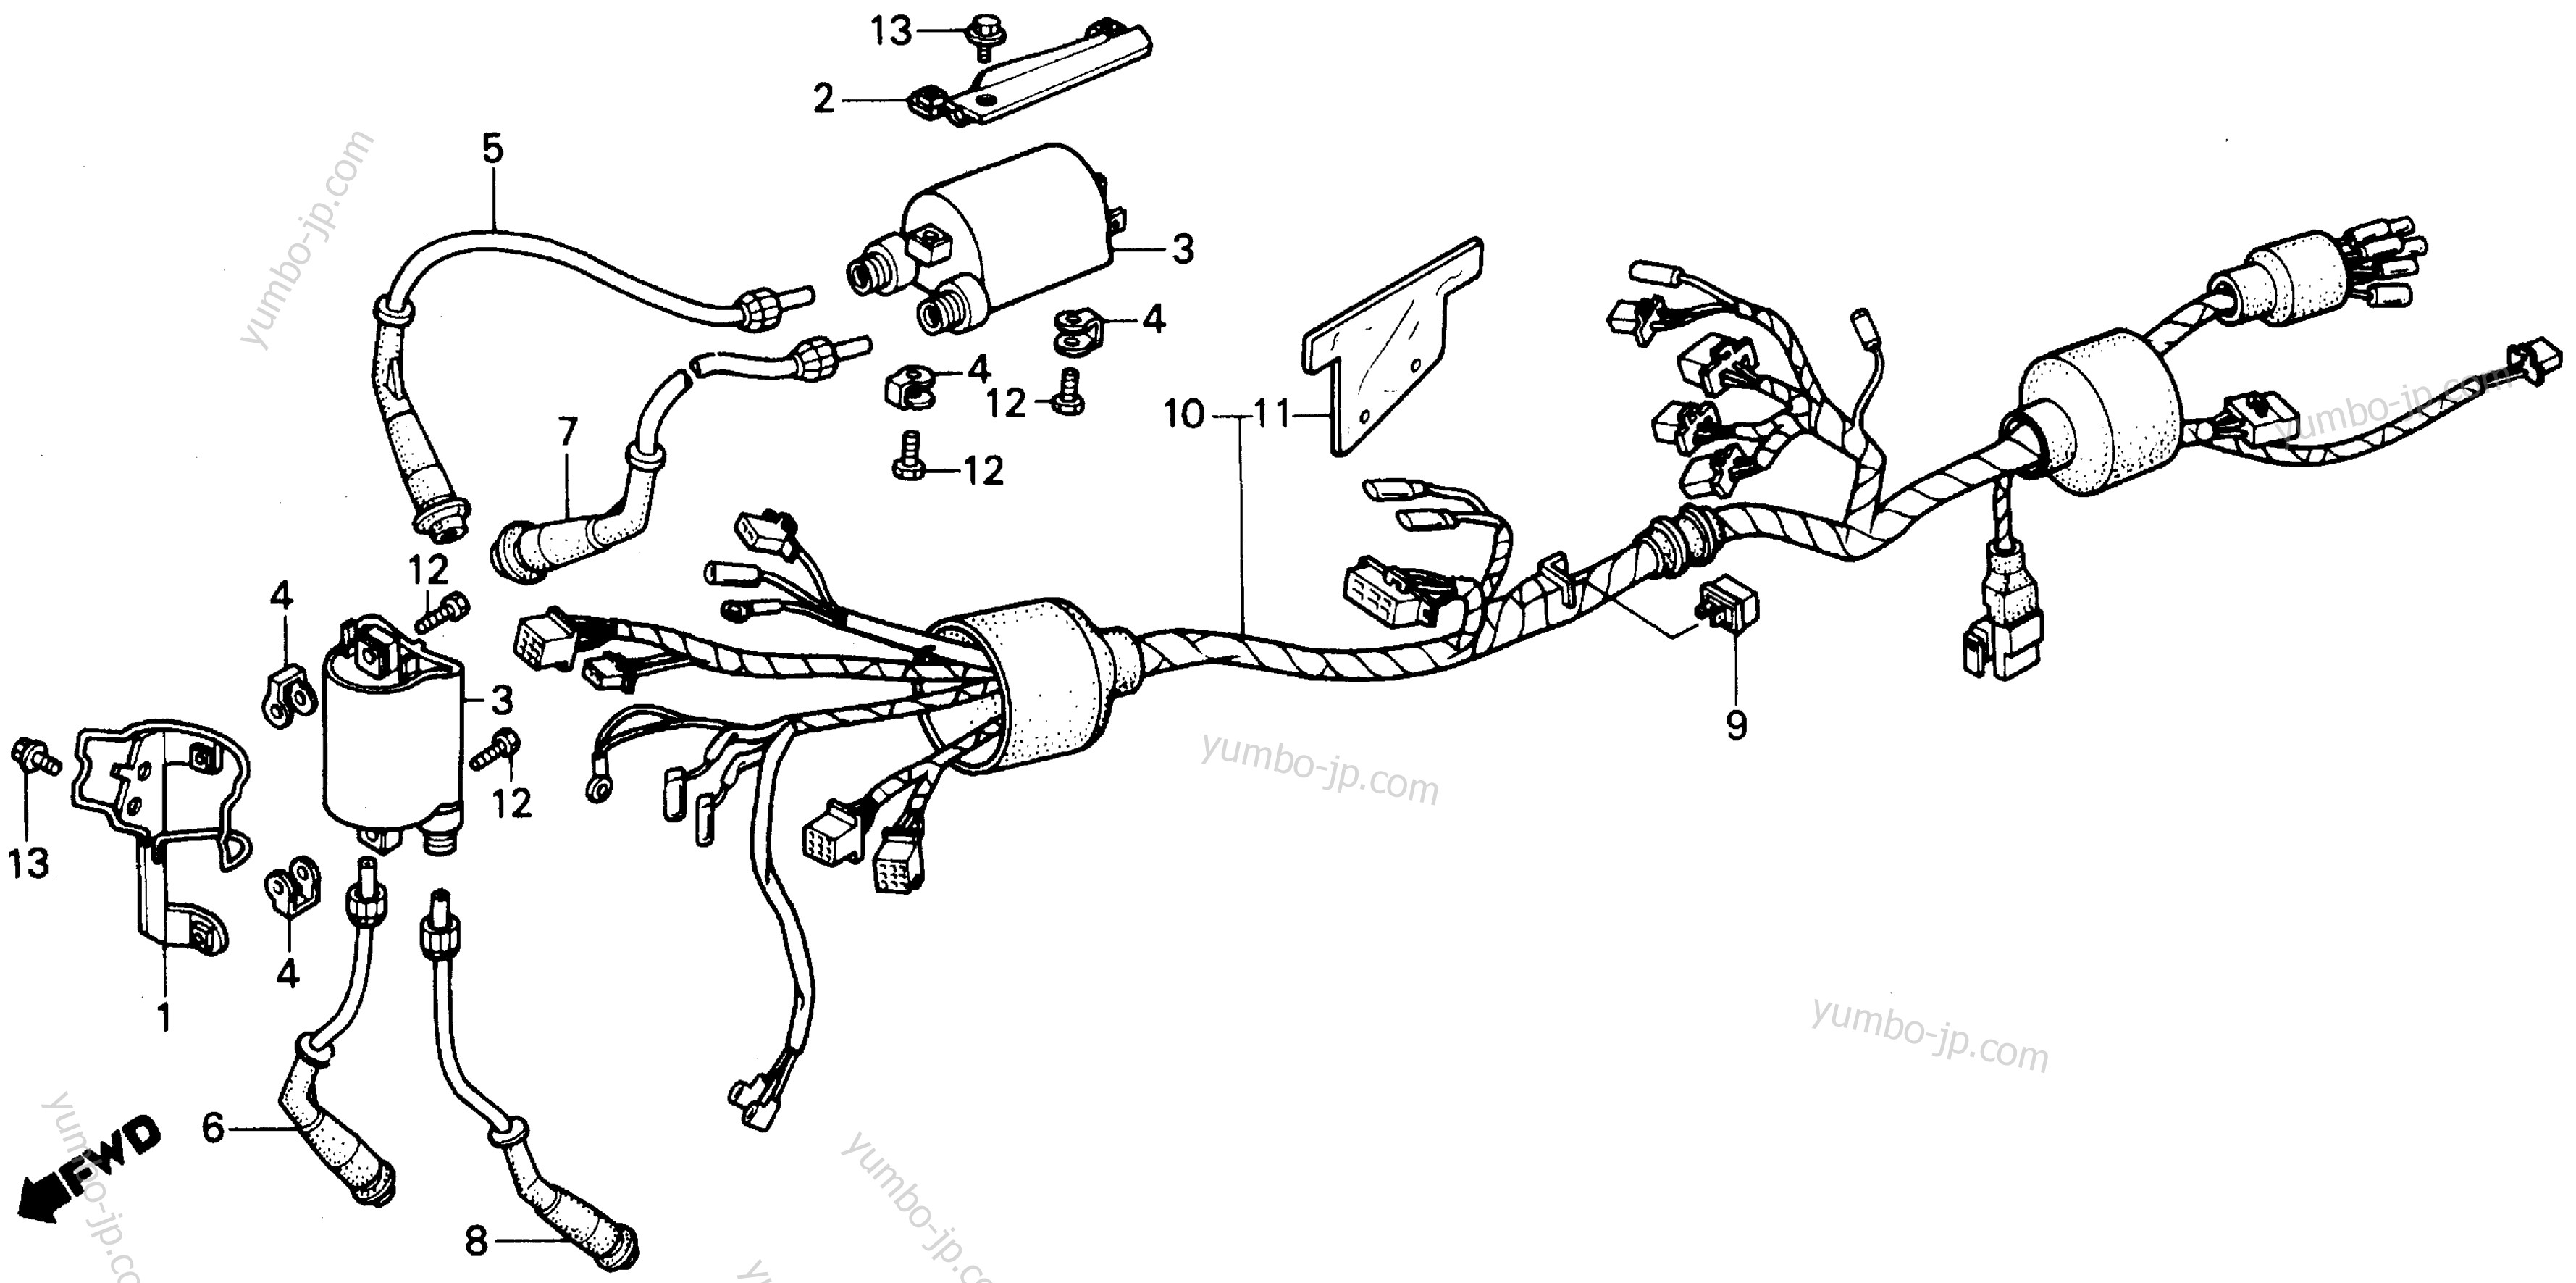 WIRE HARNESS for motorcycles HONDA VF750C AC 1988 year